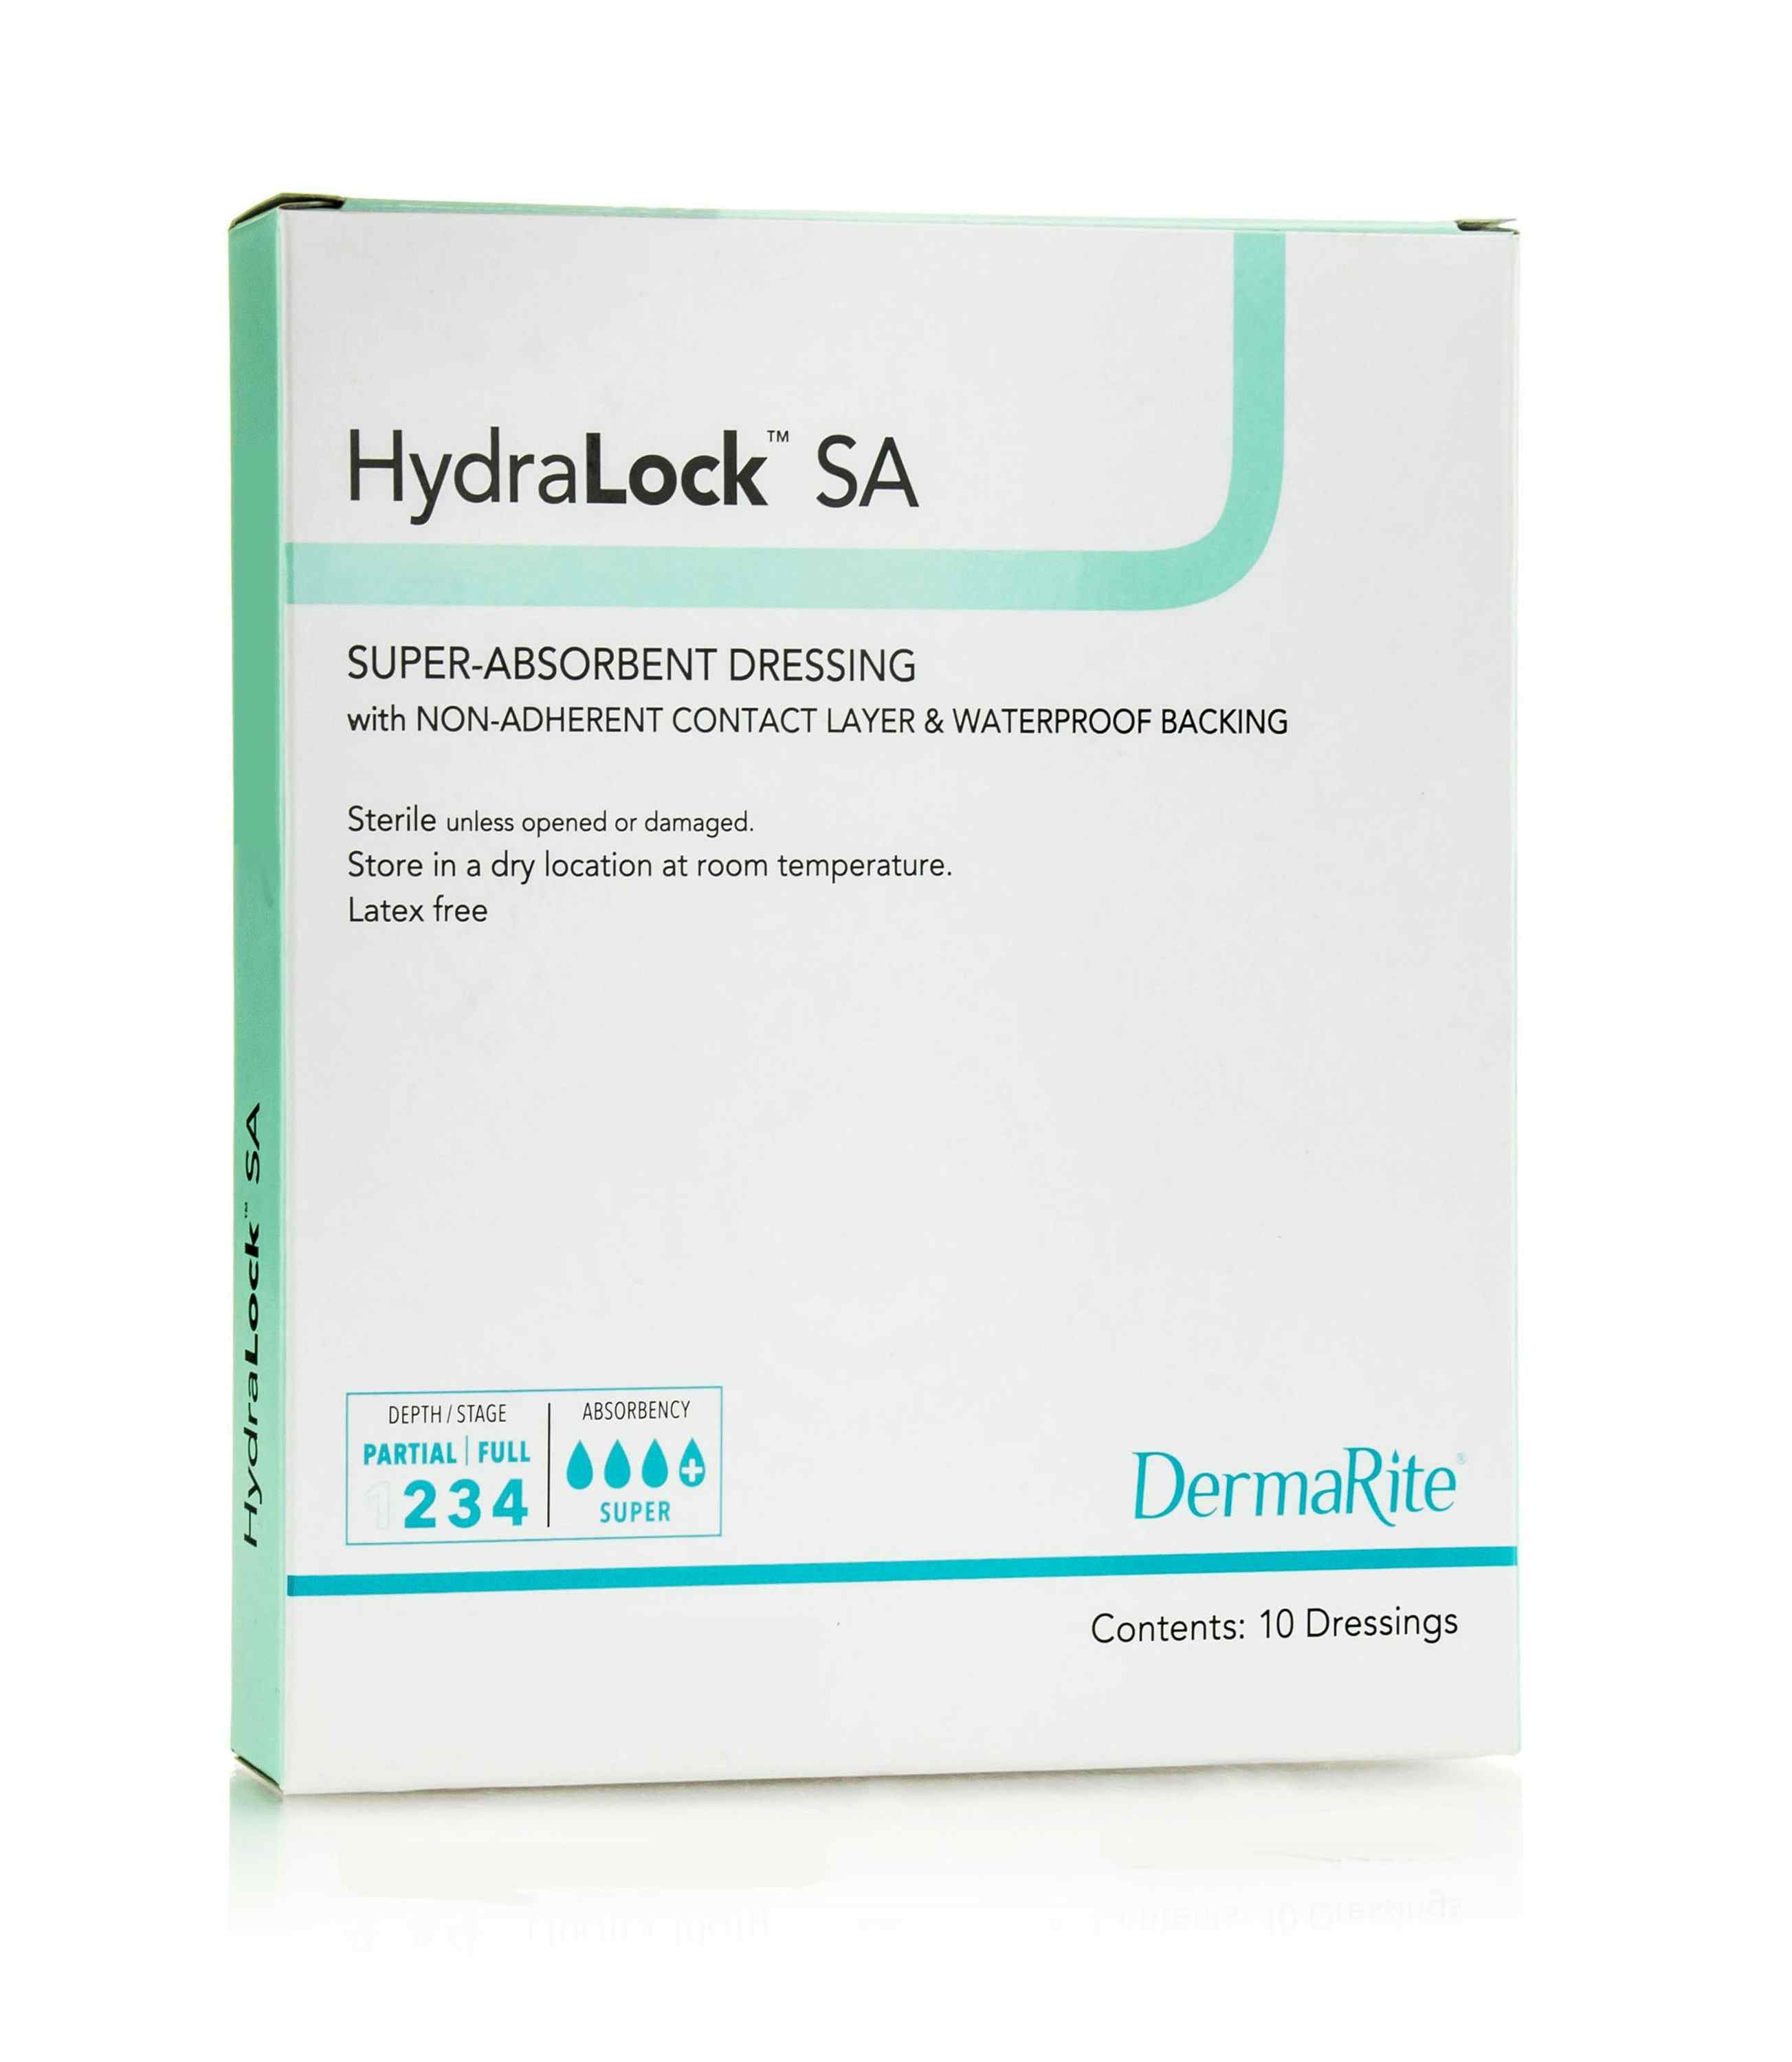 HydraLock SA Super-Absorbent Dressing with Non-Adherent Contact Layer & Waterproof Backing, 6 X 10"